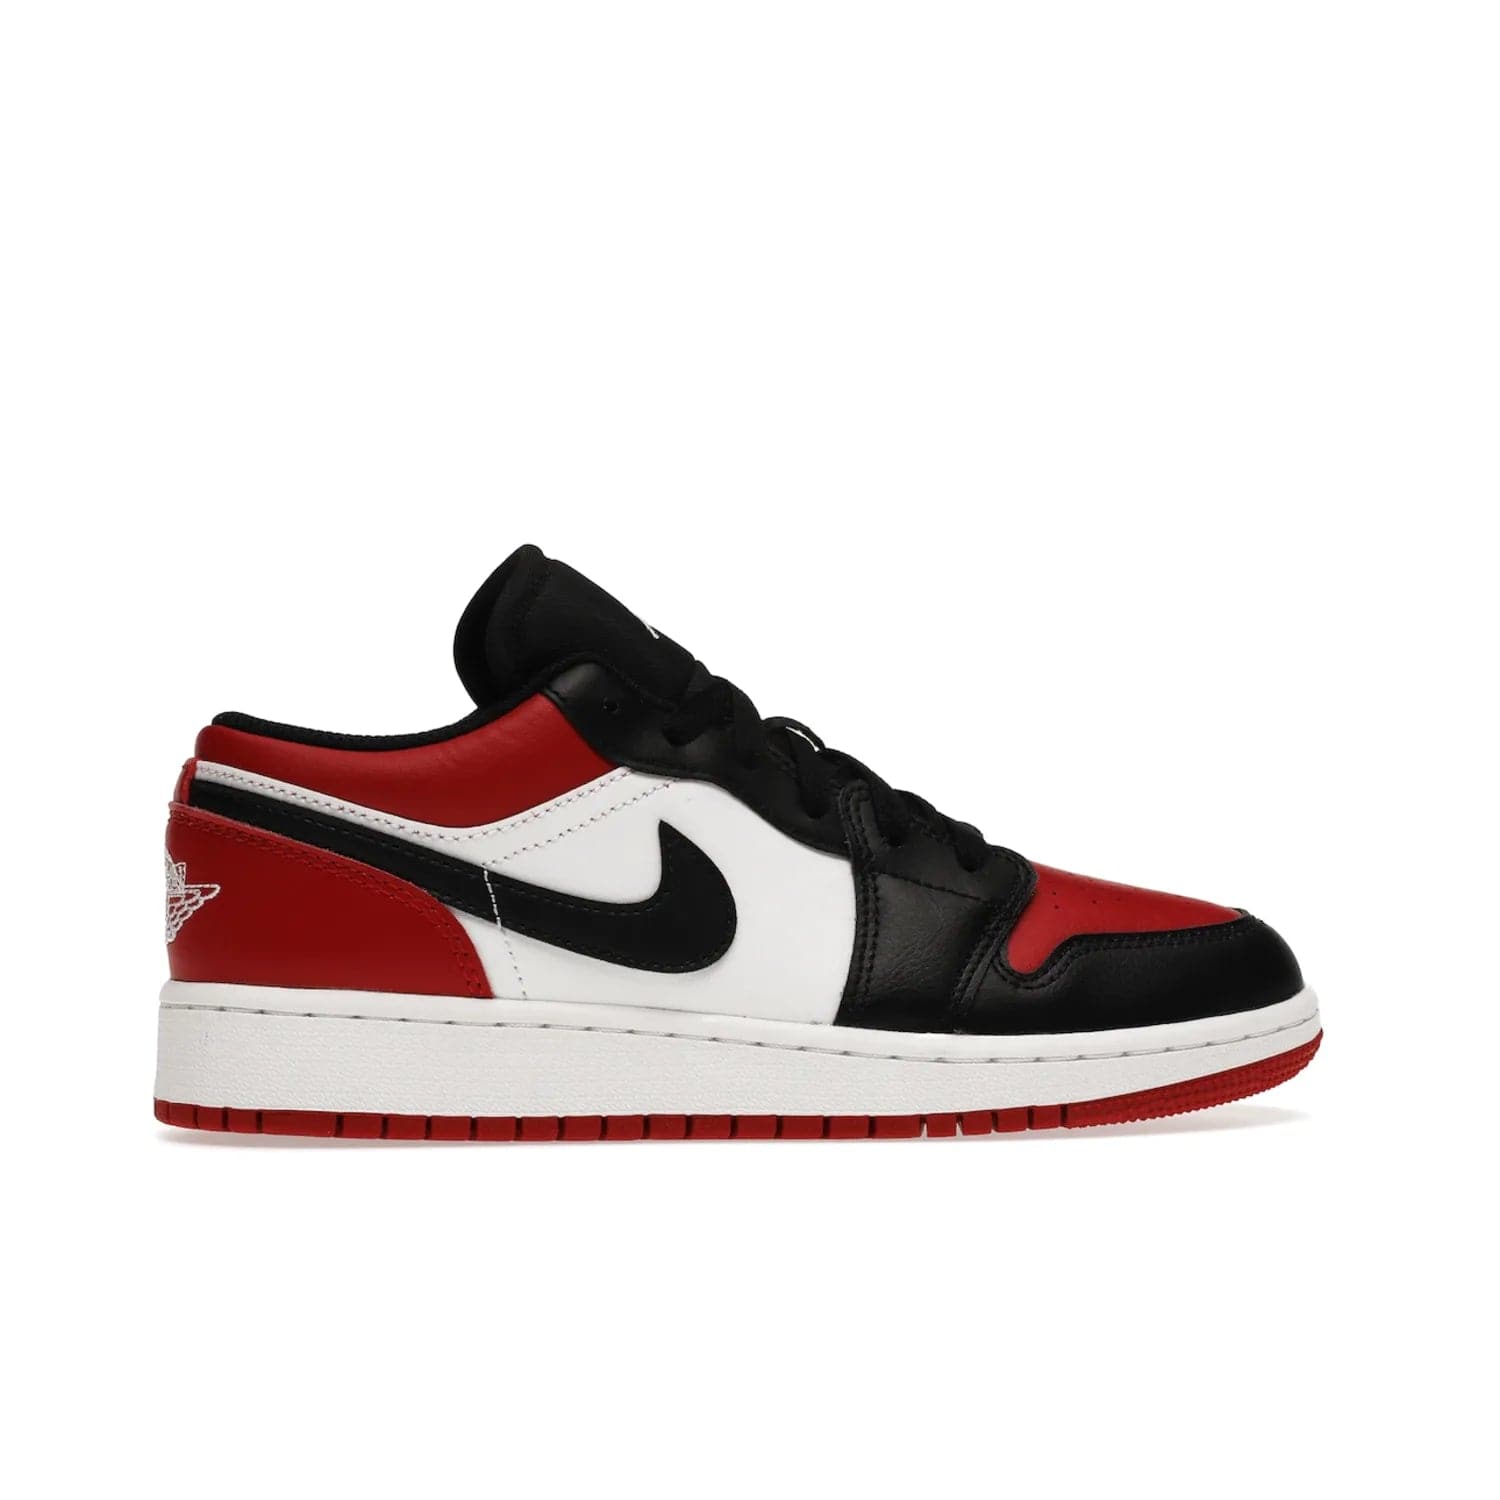 Jordan 1 Low Bred Toe (GS) - Image 36 - Only at www.BallersClubKickz.com - #
Iconic sneaker from Jordan brand with classic colorway, unique detailing & Air Jordan Wings logo. Step into the shoes of the greats with the Jordan 1 Low Bred Toe GS!